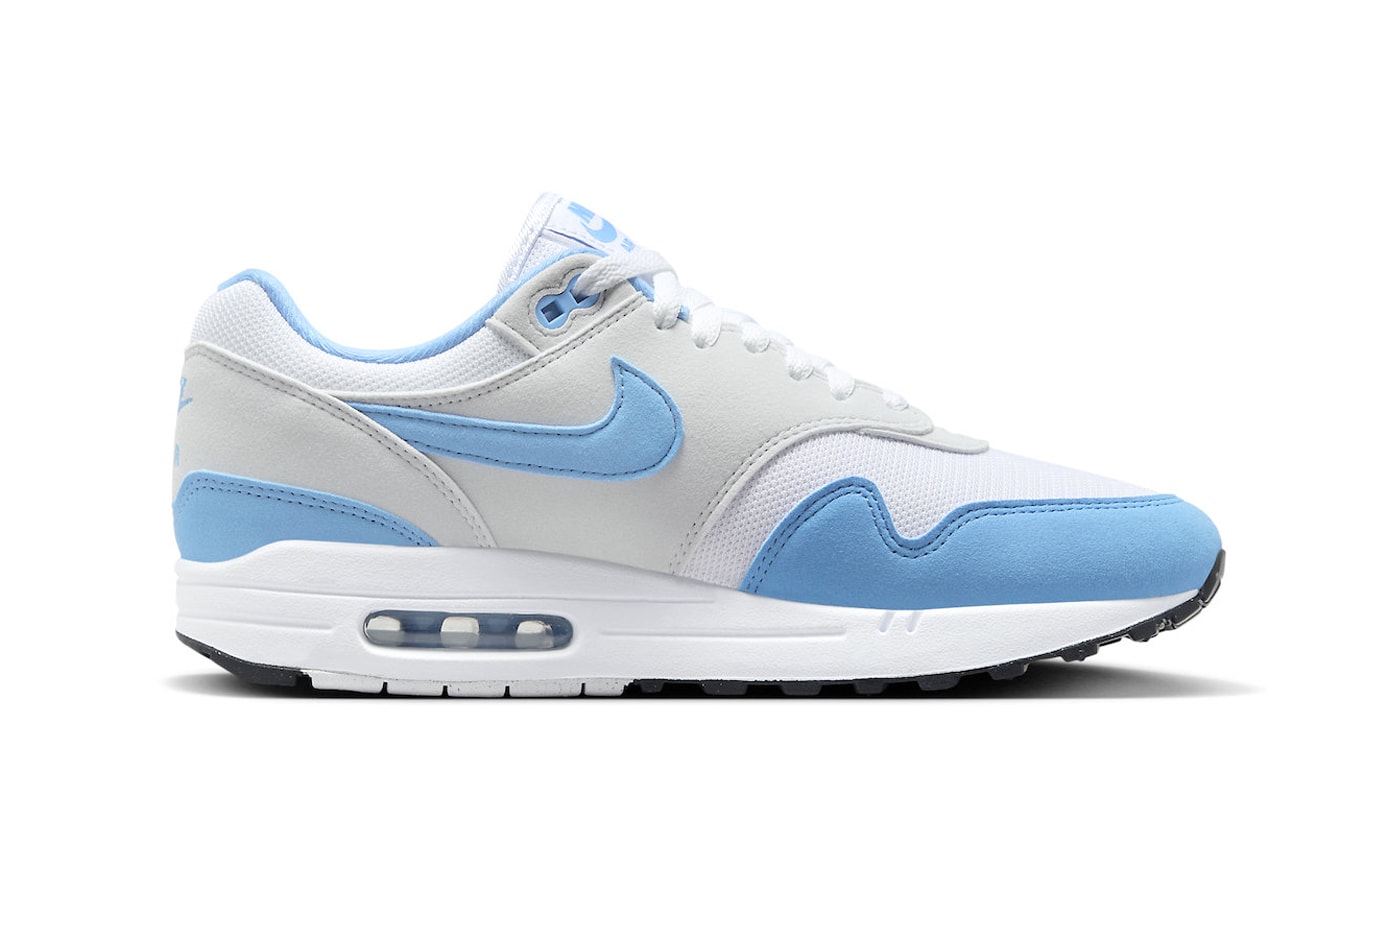 Official Look at the Nike Air Max 1 "University Blue" FD9082-103 White/University Blue-Photon Dust-Black release info november